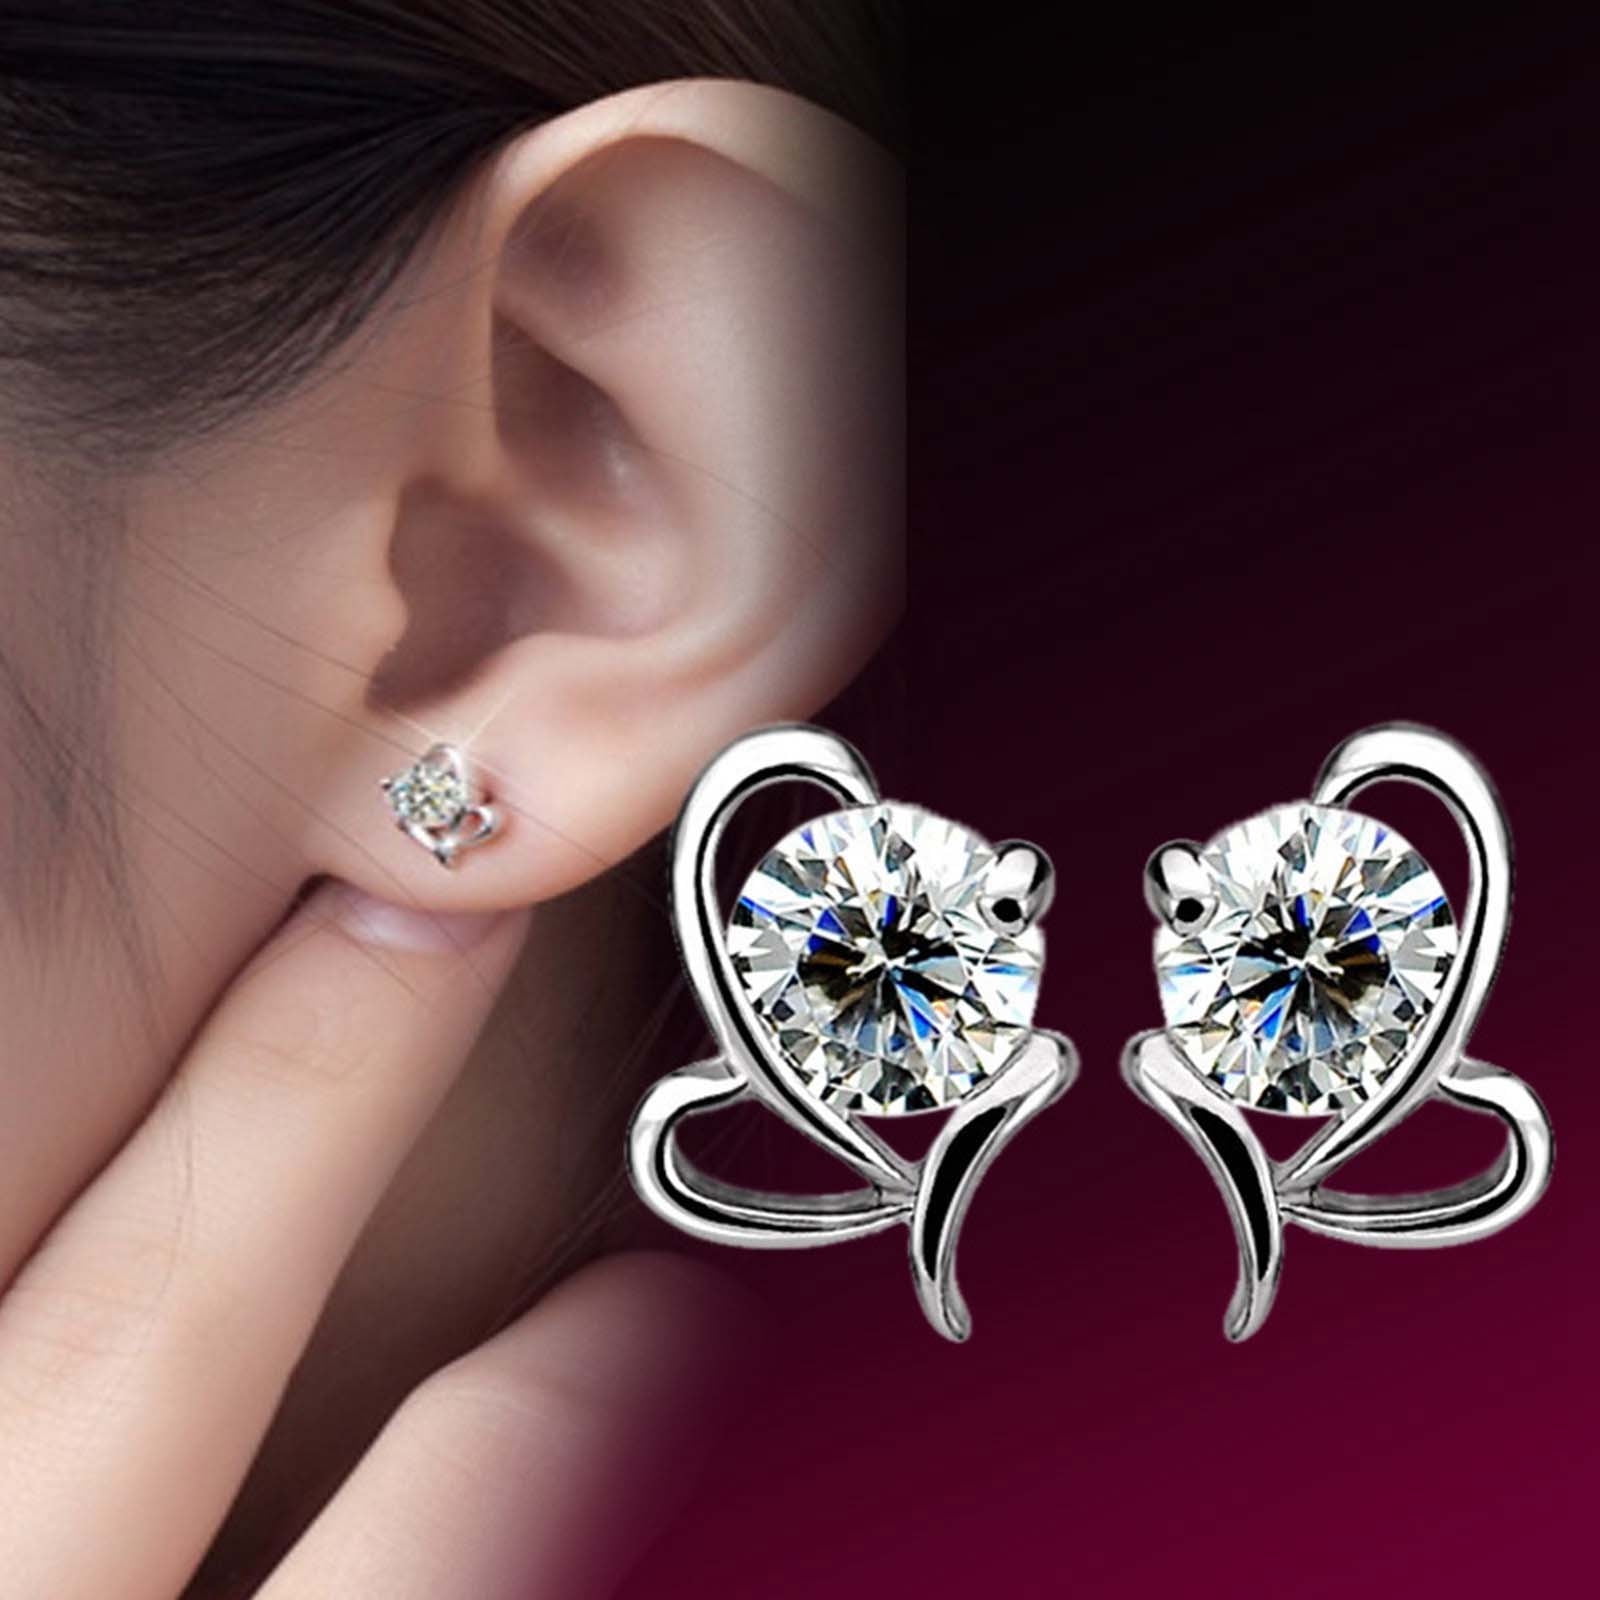 Deals of the Week! Sterling Silver Infinite Love Earrings with Birthday  Stone Crystal Jewelry Gift - Walmart.com